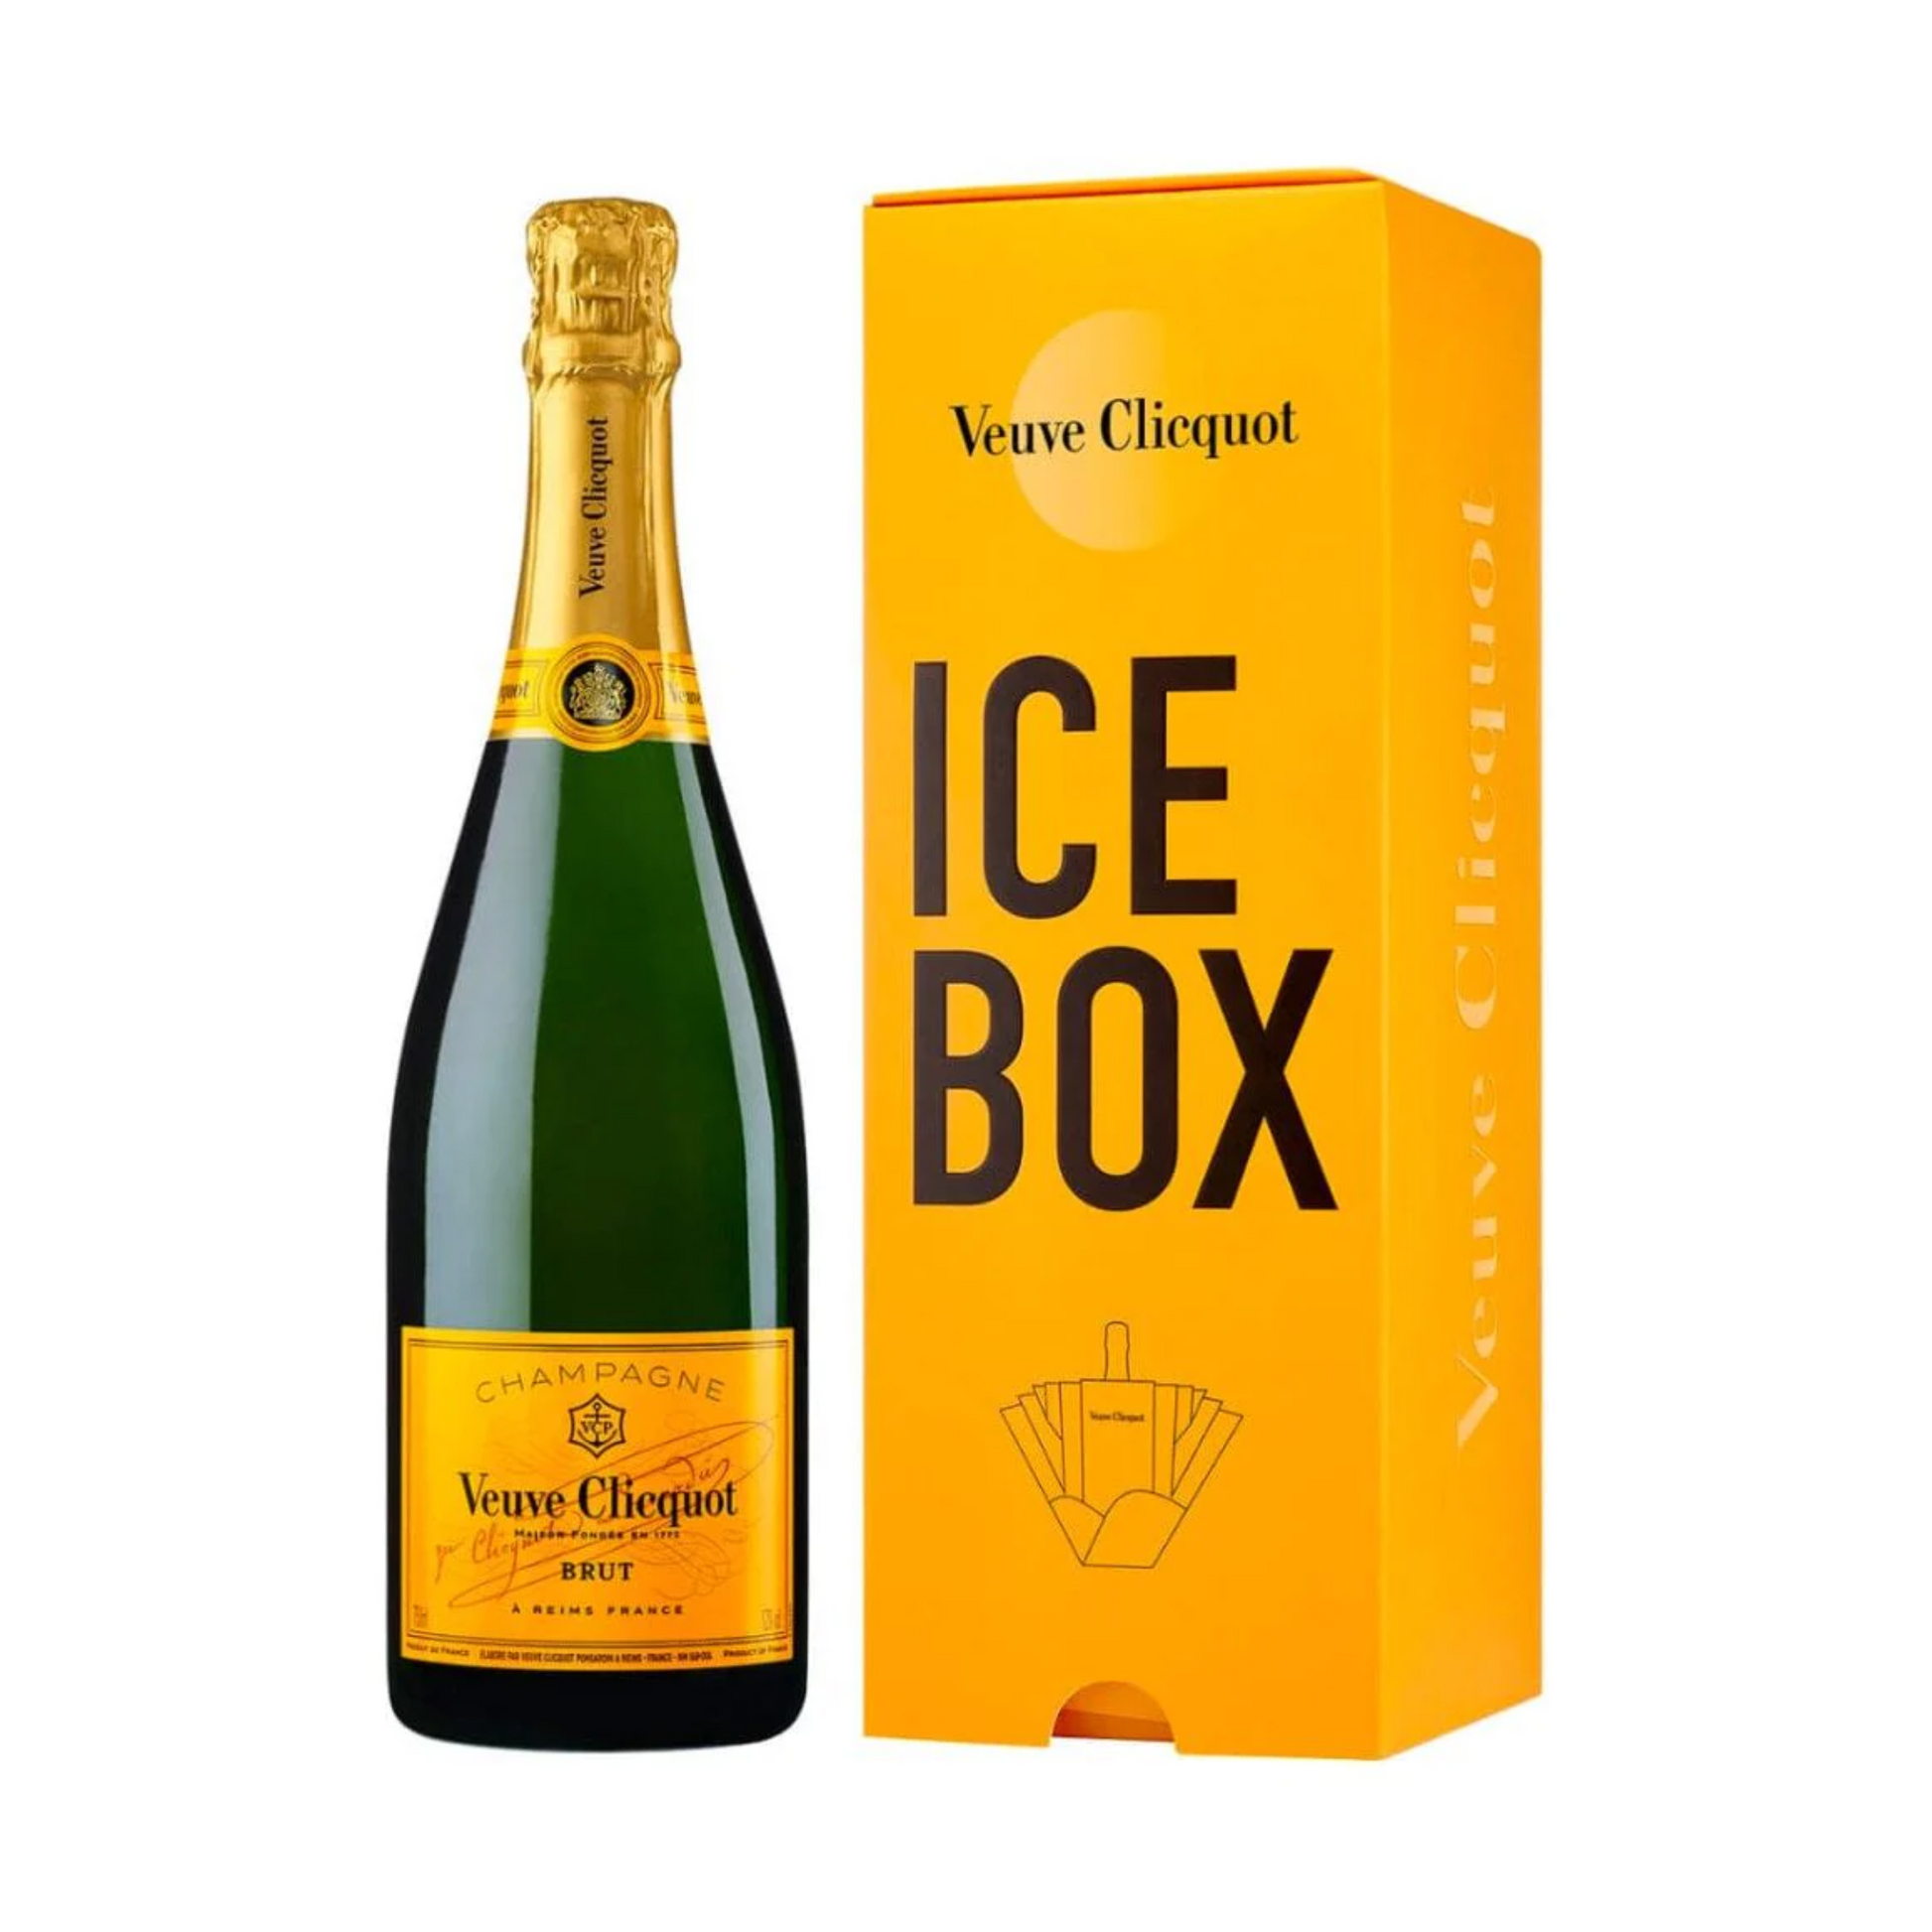 Veuve Clicquot Champagne Brut With Ice Box Gift Box - Liquor Geeks